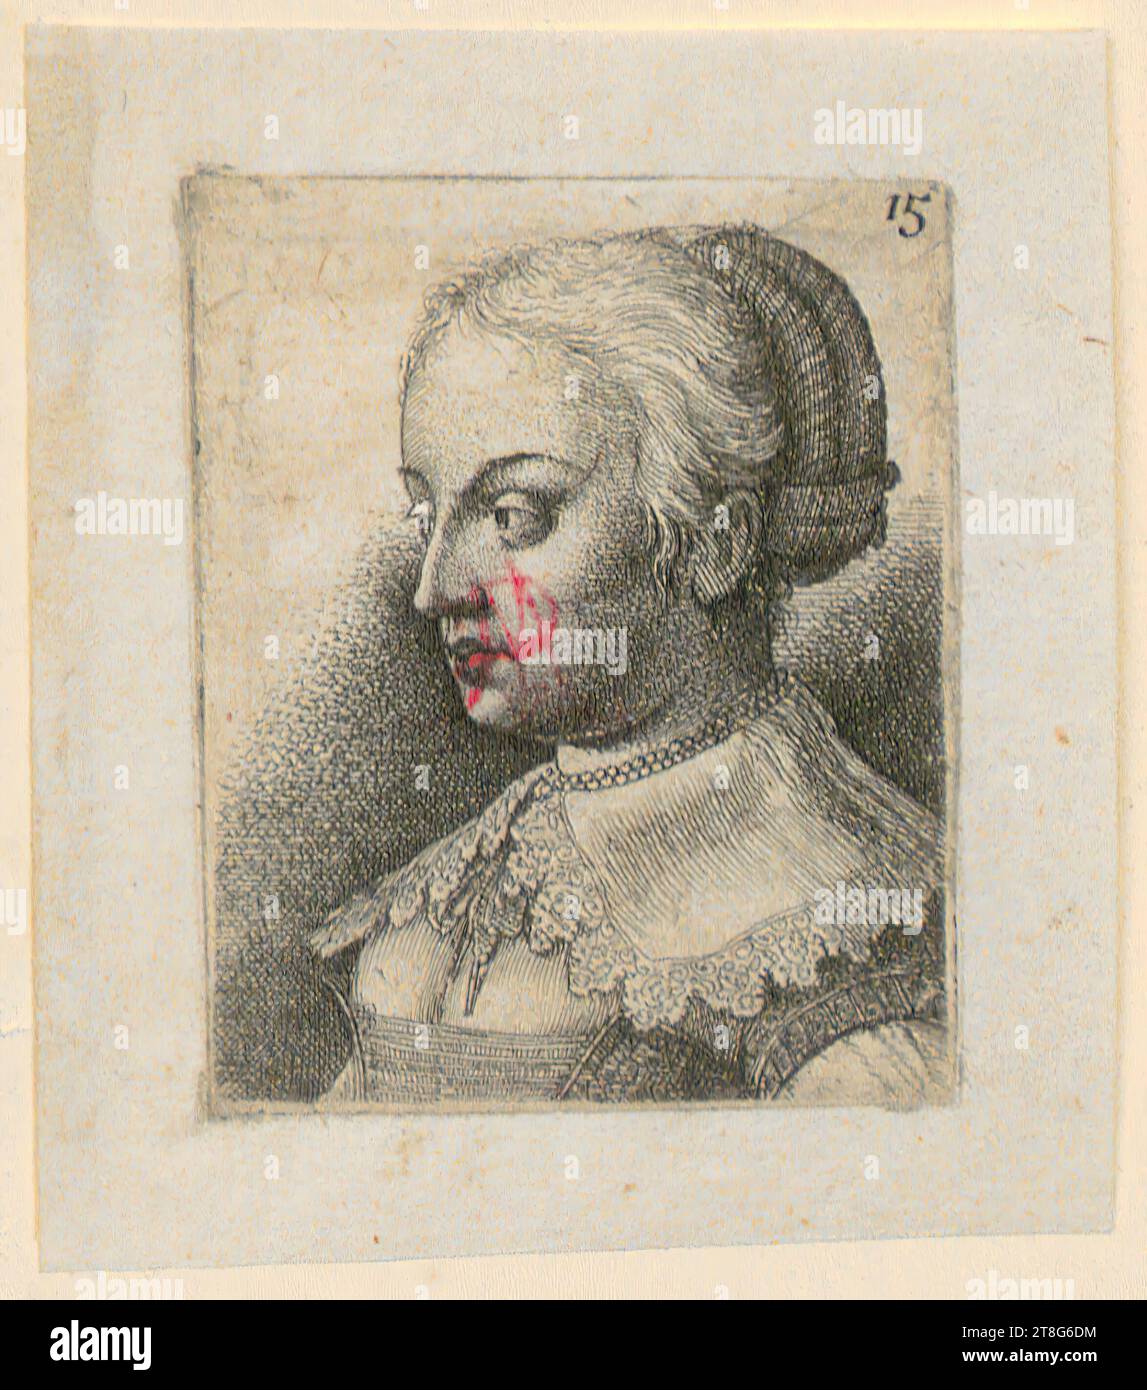 Wenzel Hollar (1607 - 1677)Abraham Hogenberg (1608 mentioned before - after 1653), editor, woman with braided hair, sheet 15 of the series 'Reisebüchlein', origin of the print: 1635 - 1636, etching, sheet size: 7.4 x 6.3 cm (with set margin)sheet size: 5.6 x 4.4 cm (without set 'Rä' Field3 Top right numbered '15 Stock Photo